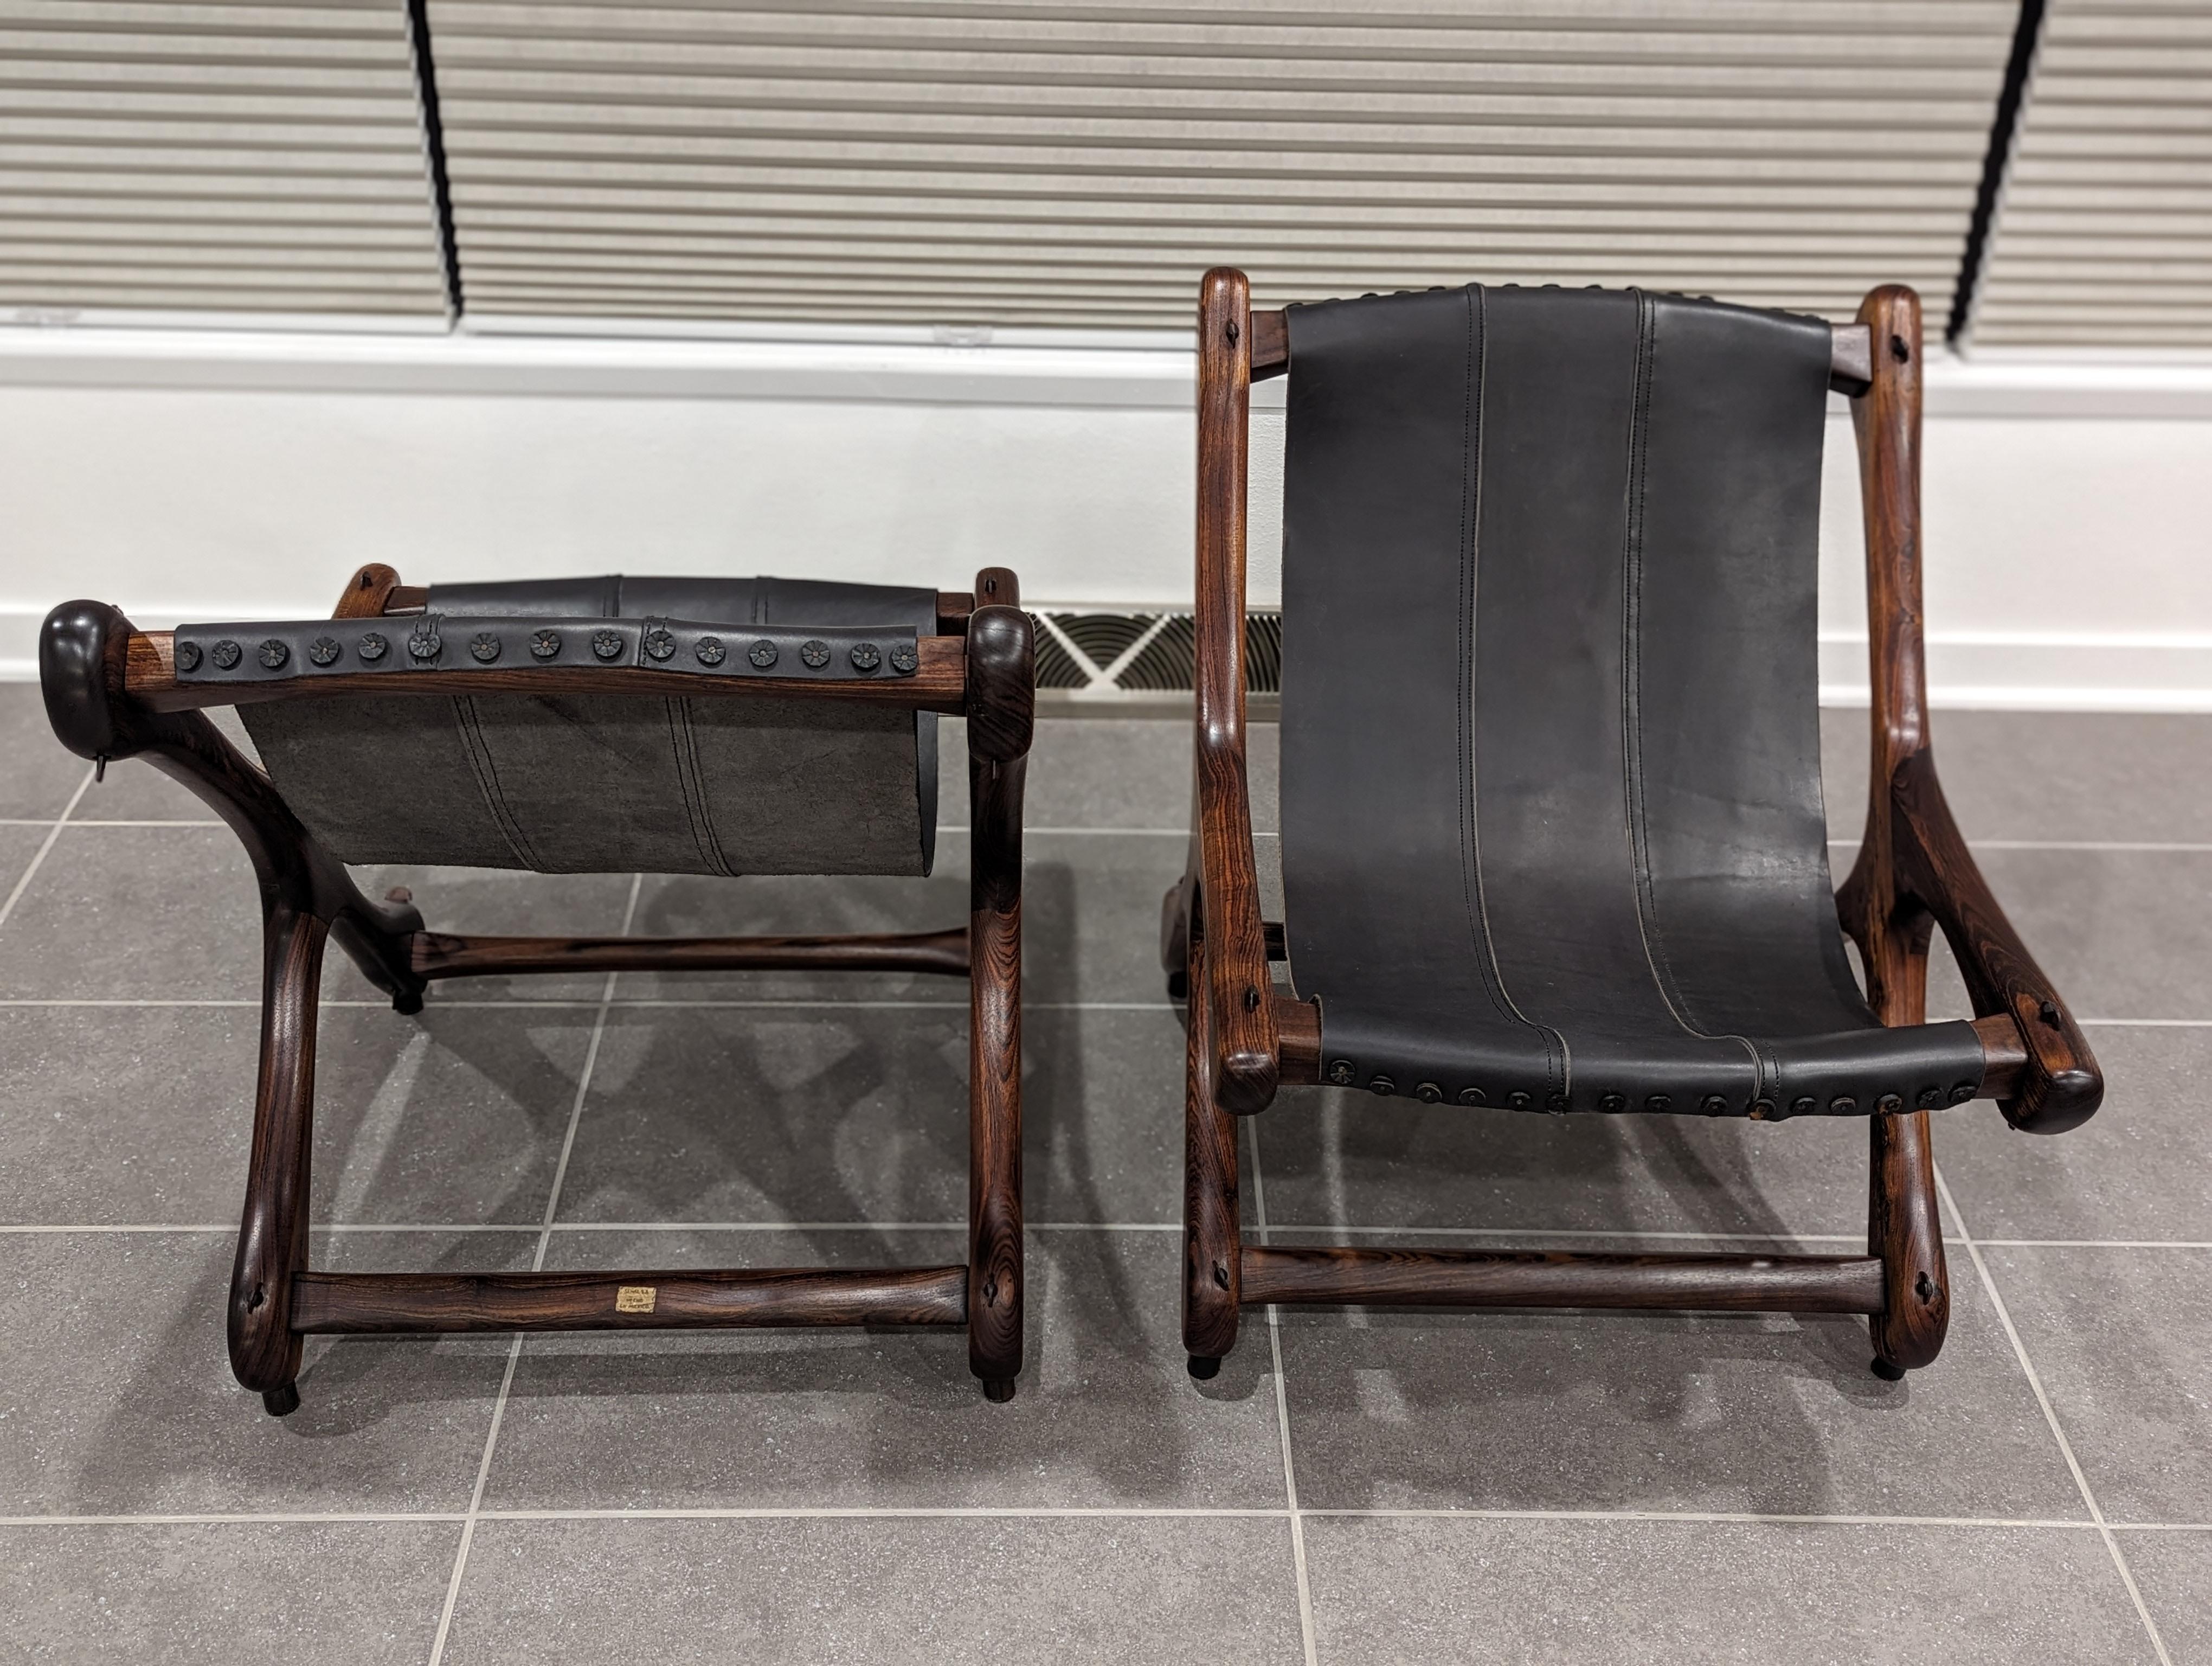 Don Shoemaker Sloucher Rosewood & Leather Sling Chairs for Señal, S.A., 1960s For Sale 14